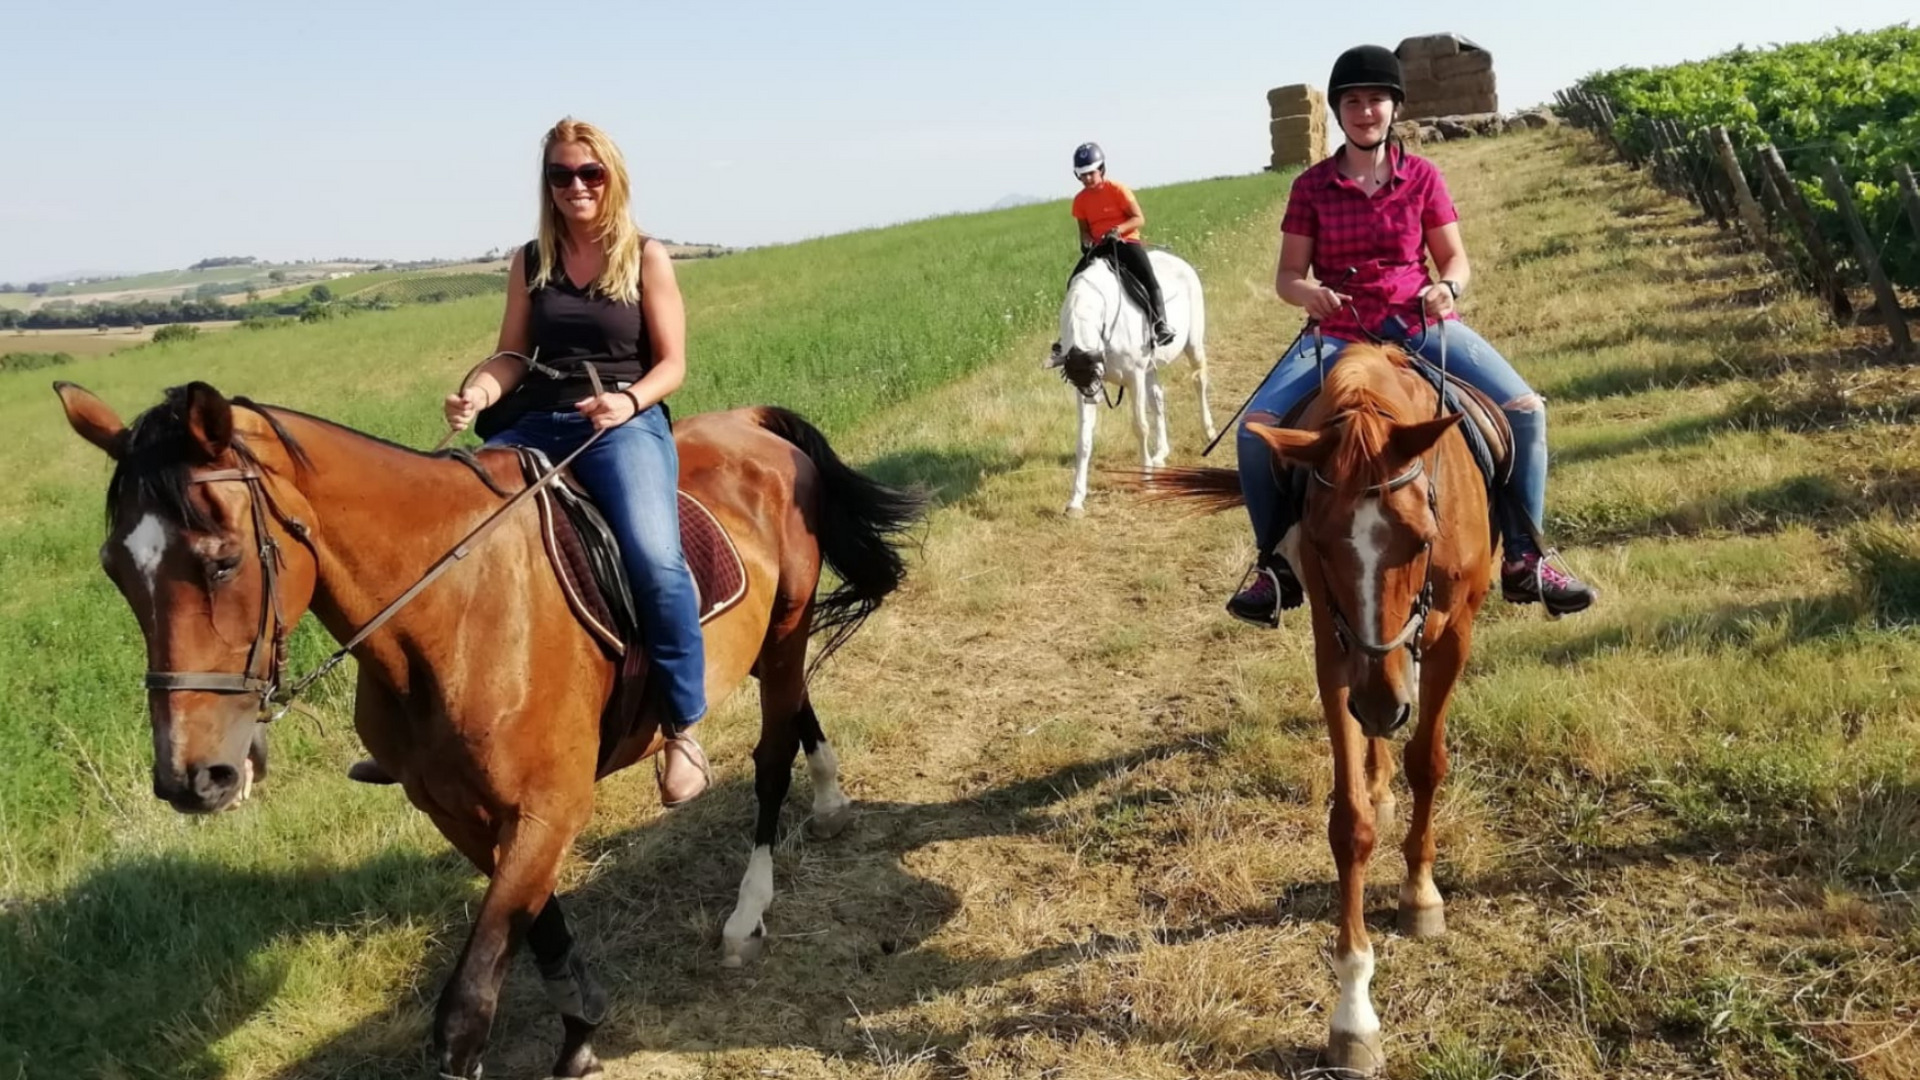 Horseback riding on the hills of Valdichiana with tasting of local wines